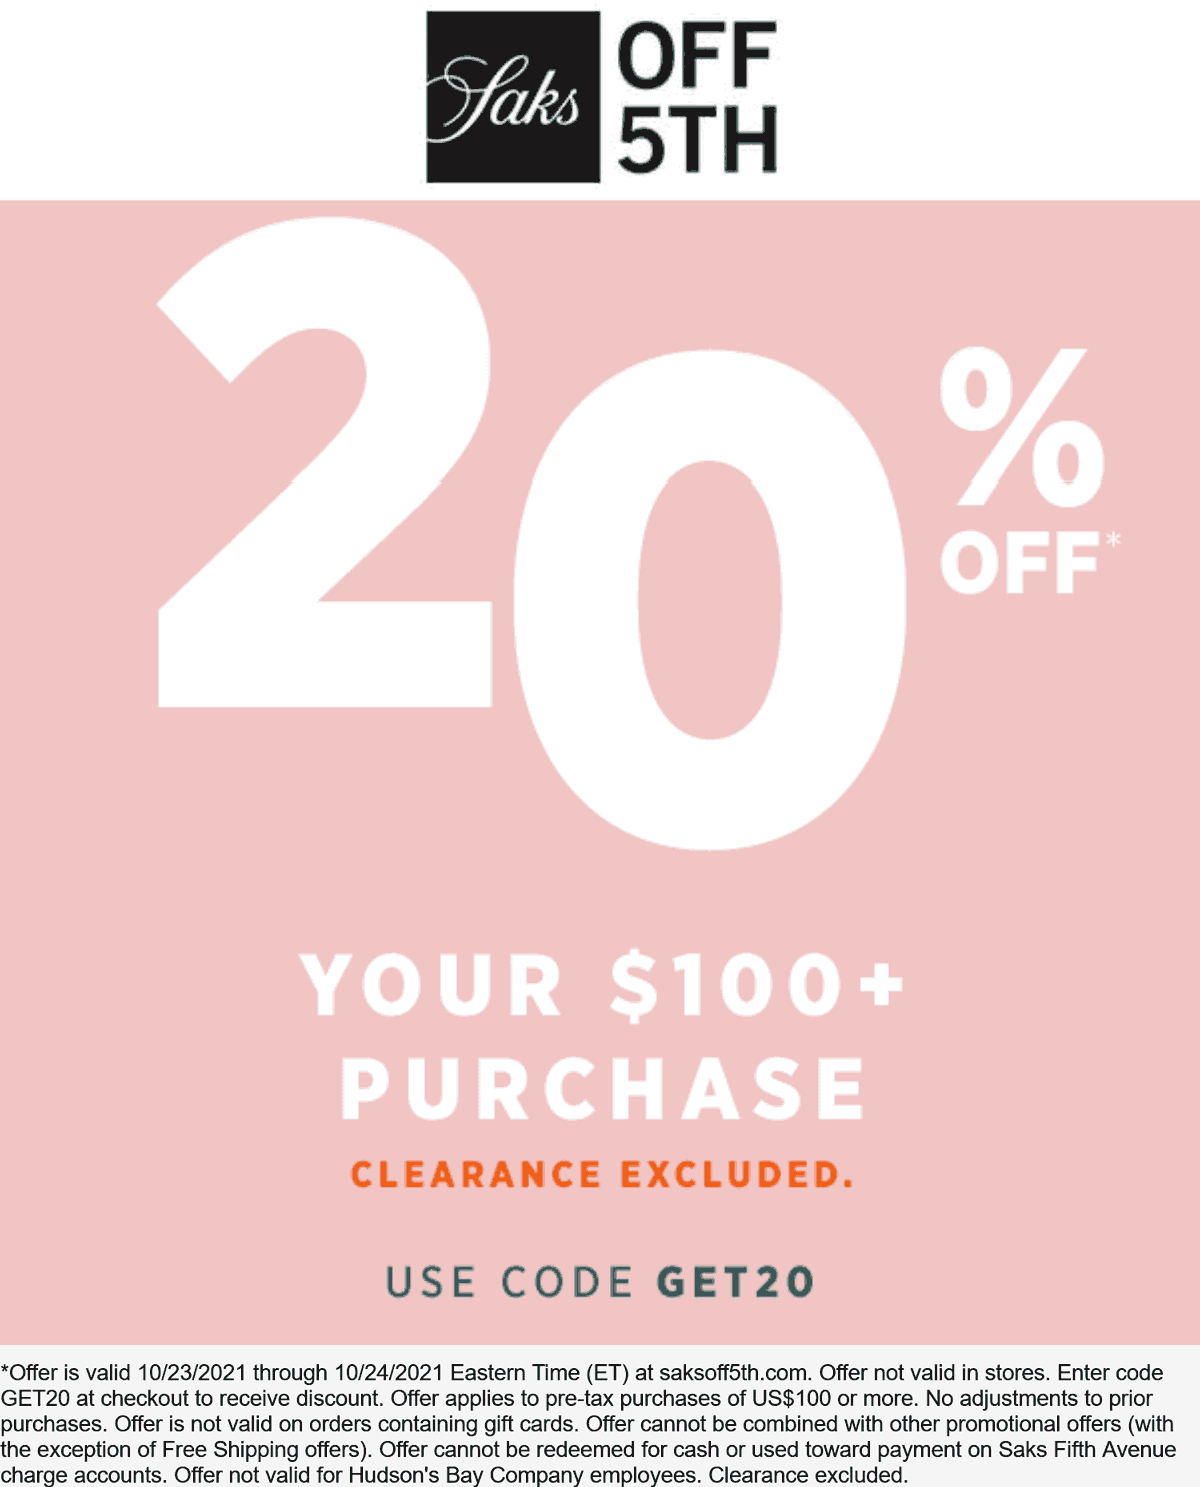 OFF 5TH stores Coupon  20% off $100 online at Saks OFF 5TH via promo code GET20 #off5th 